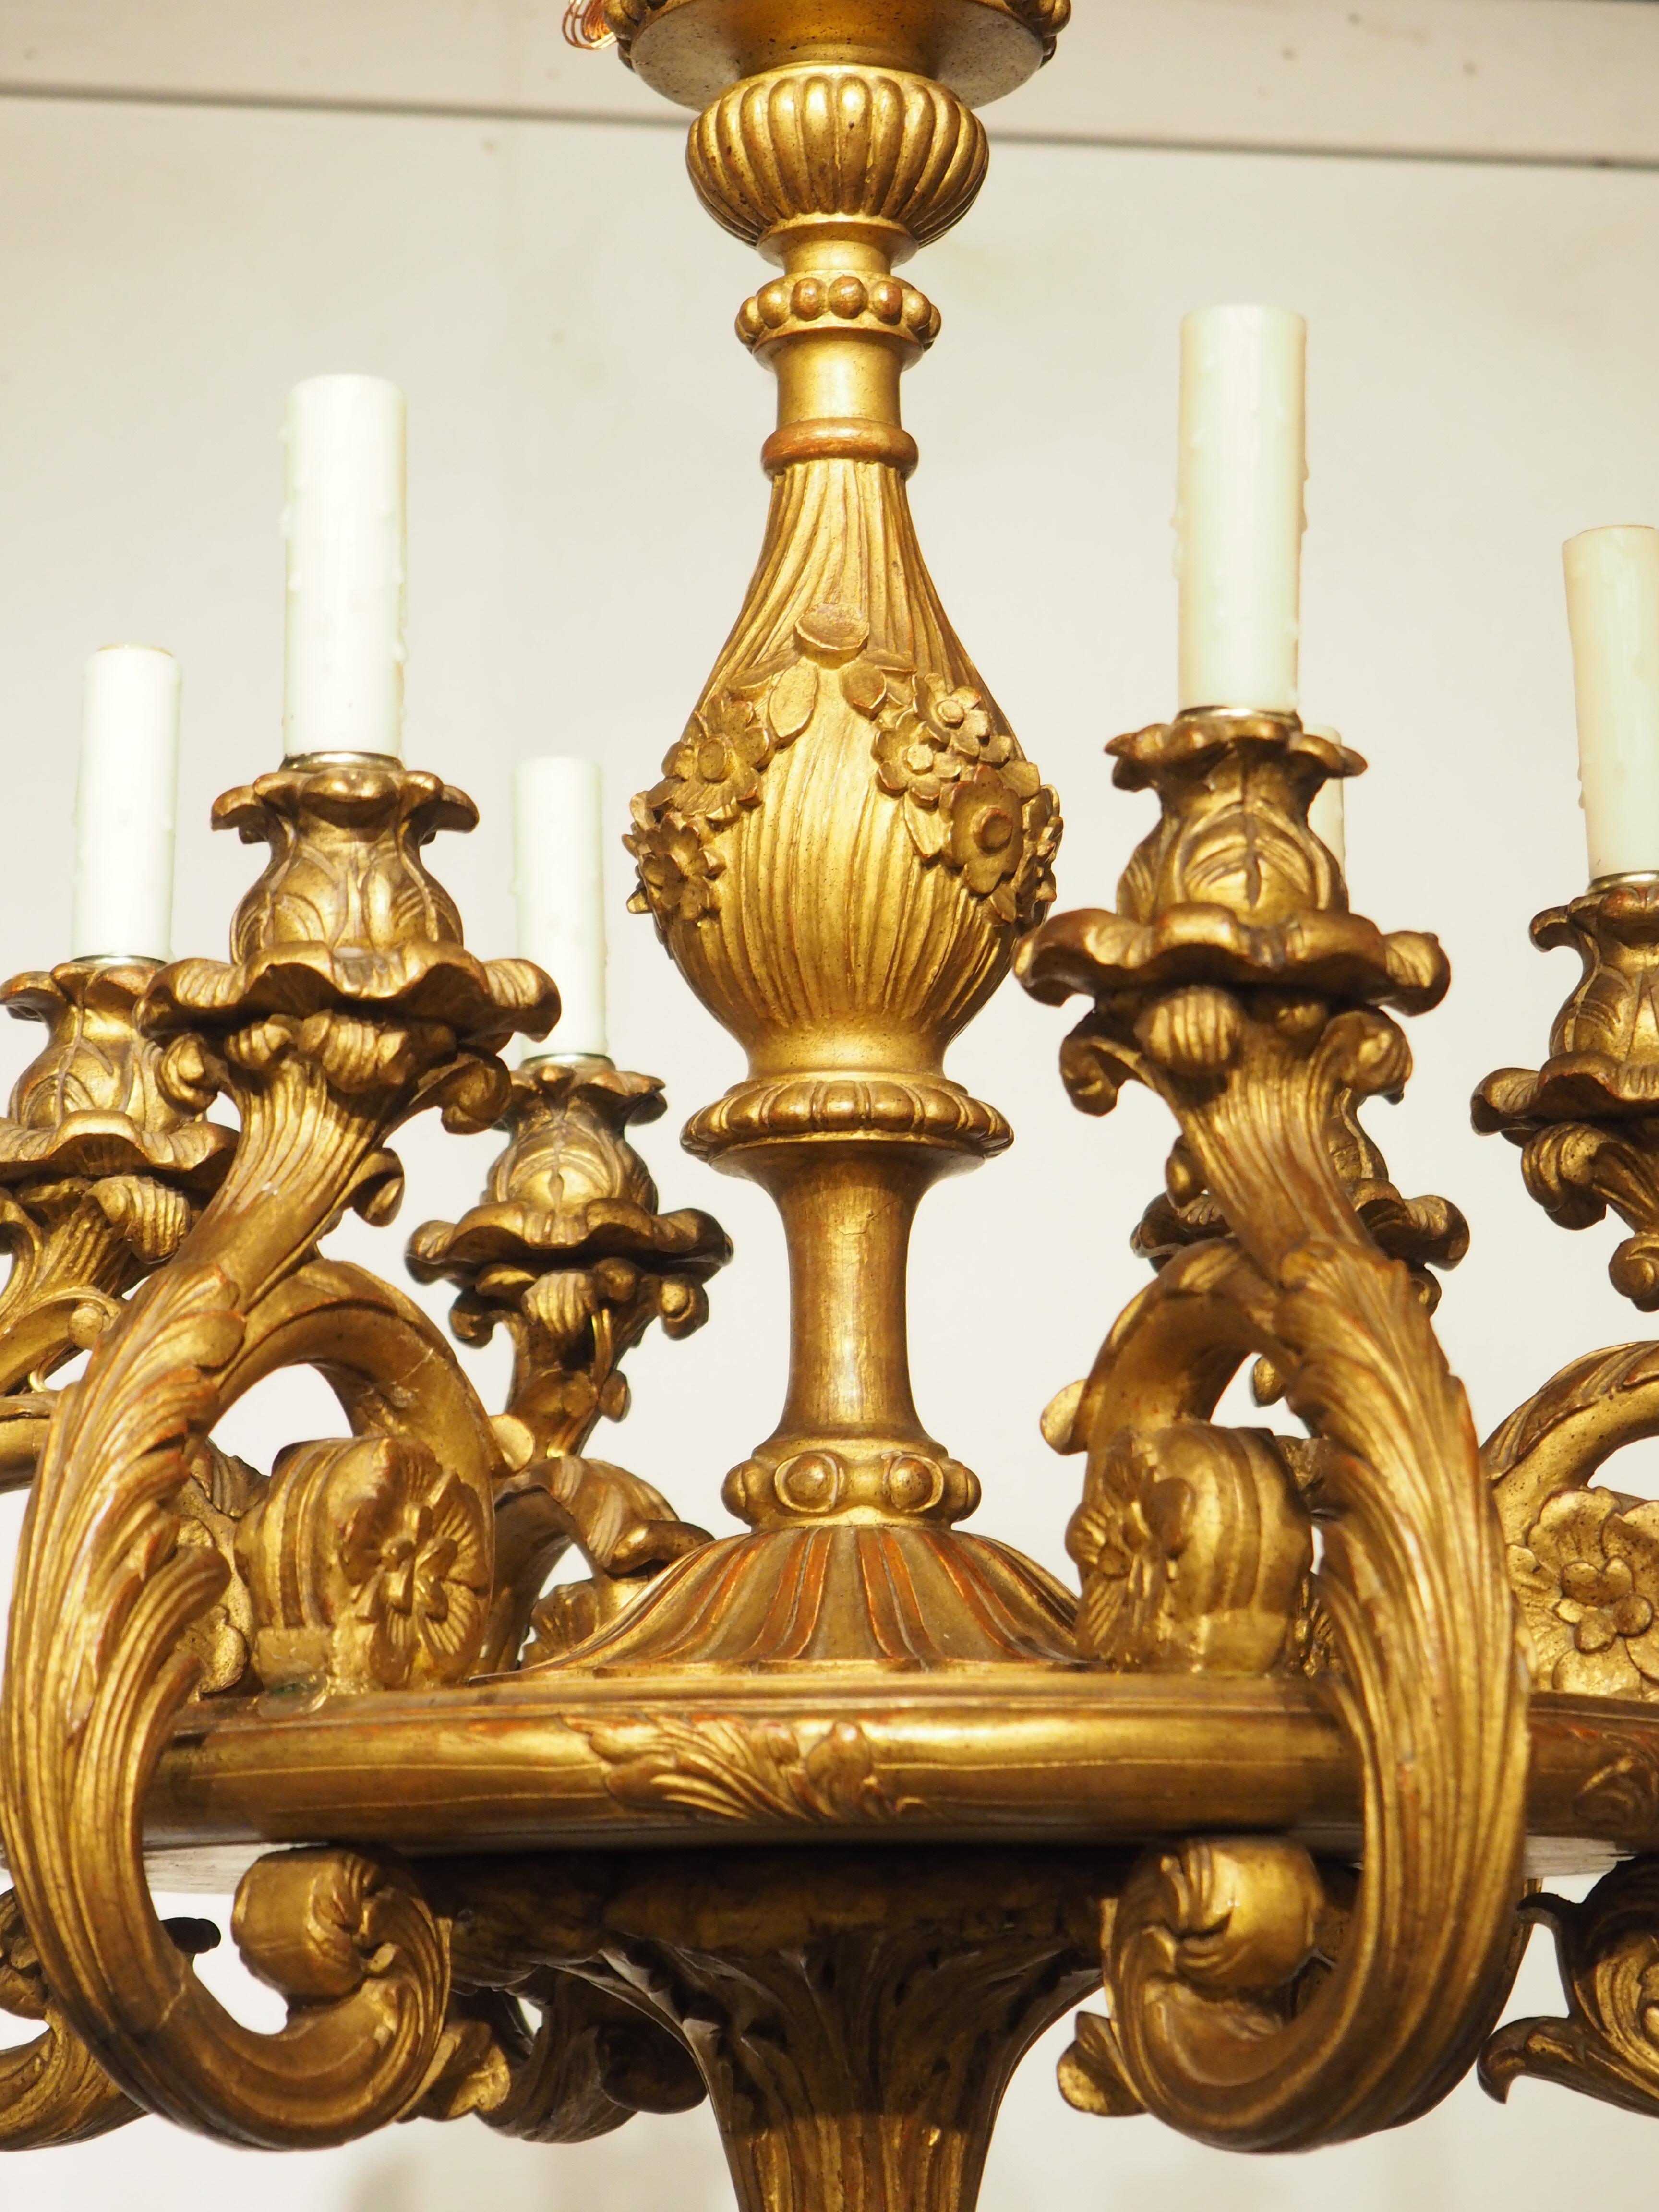 The perfect illumination source for a more intimate setting, this small six-light chandelier was hand-carved in Italy, circa 1860. Six foliate arms originate on the underside of the circular main body, curling upwards before terminating in a floret